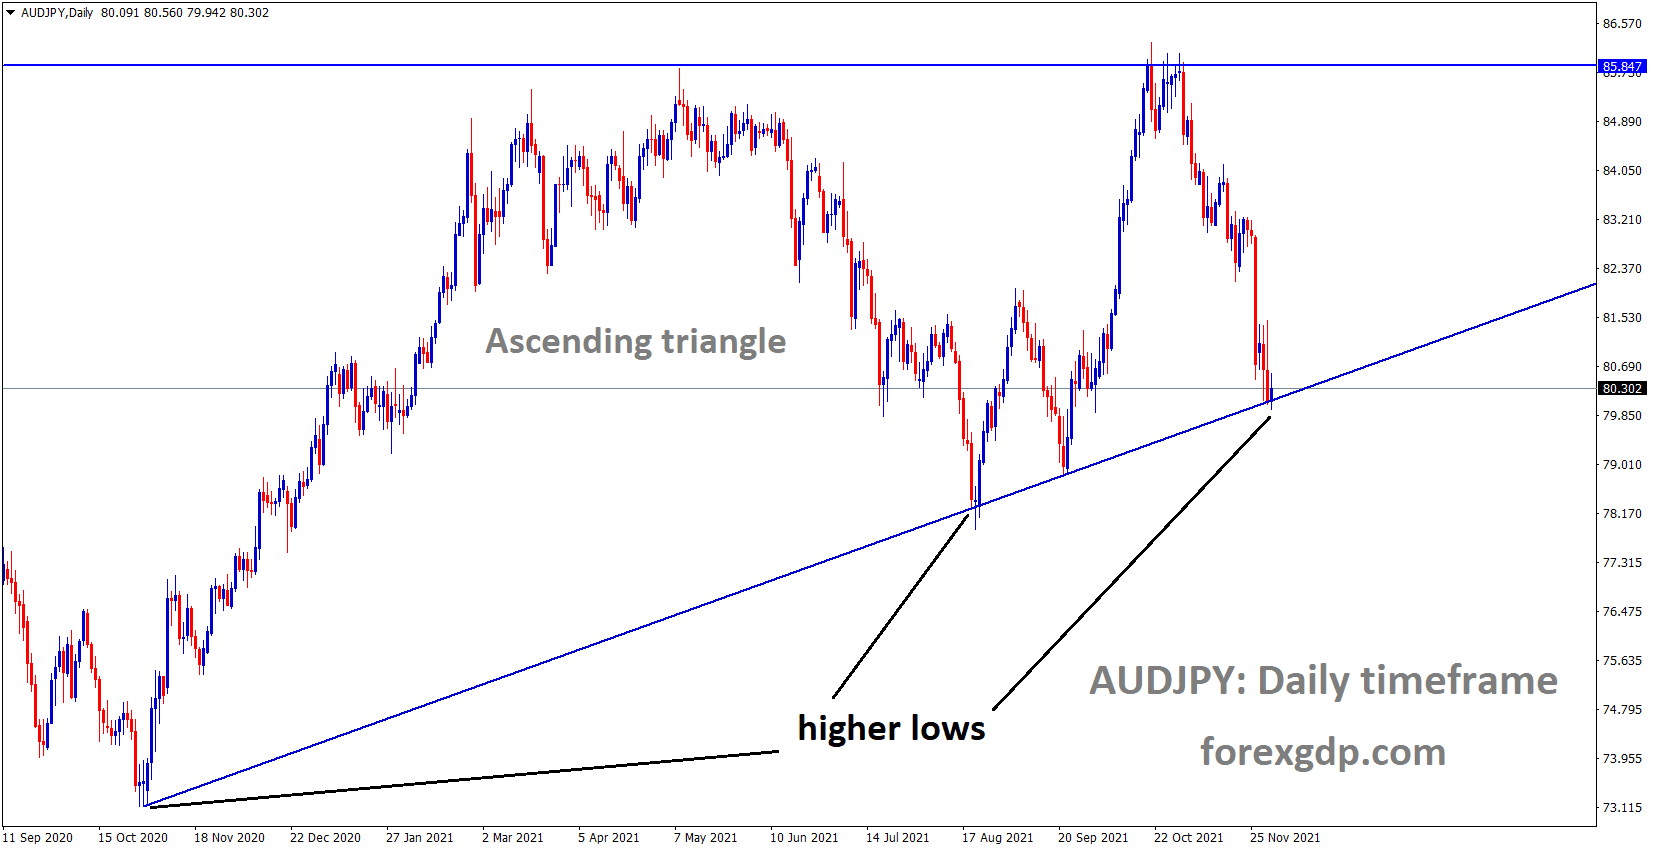 AUDJPY is moving in the Ascending triangle pattern and the market reached the higher low area of the triangle pattern